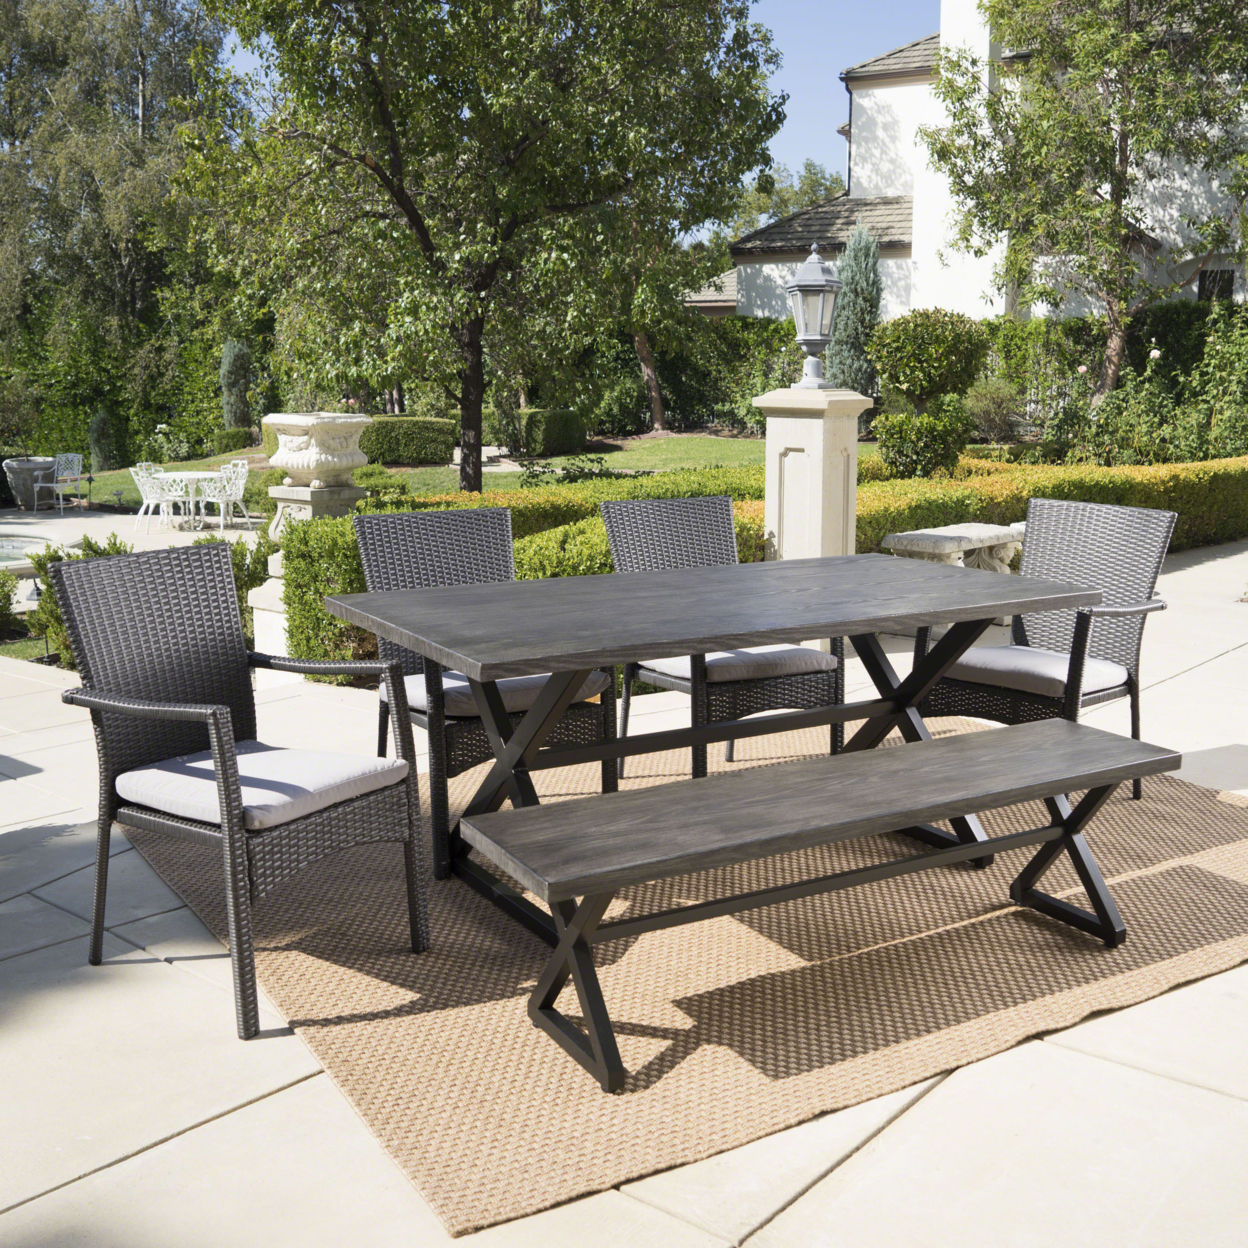 Tripoli Outdoor 6 Piece Aluminum Dining Set With Bench And Wicker Dining Chairs - Brown/Brown